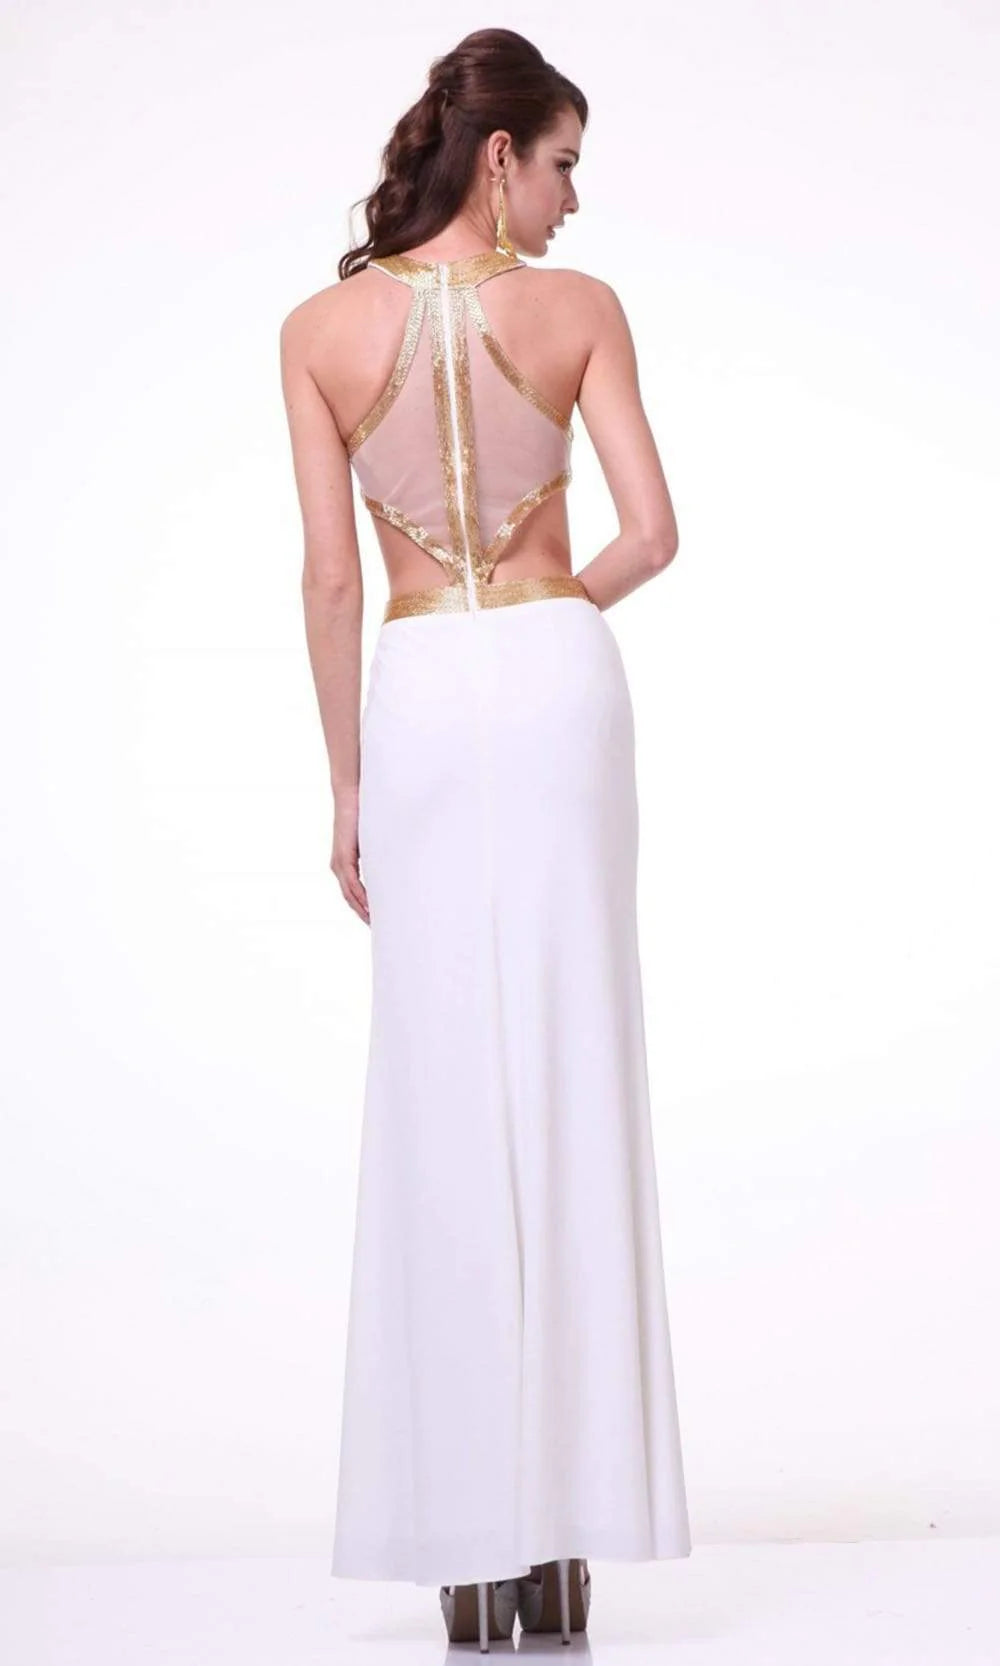 Expertly crafted, the Ladivine J735 Liquid Beaded Formal Dress is a stunning choice for any formal occasion. The high neck and cut out sides add a touch of modern elegance, while the jersey fabric flatters the figure. Stand out with the intricate beading and feel confident with the comfortable fit.